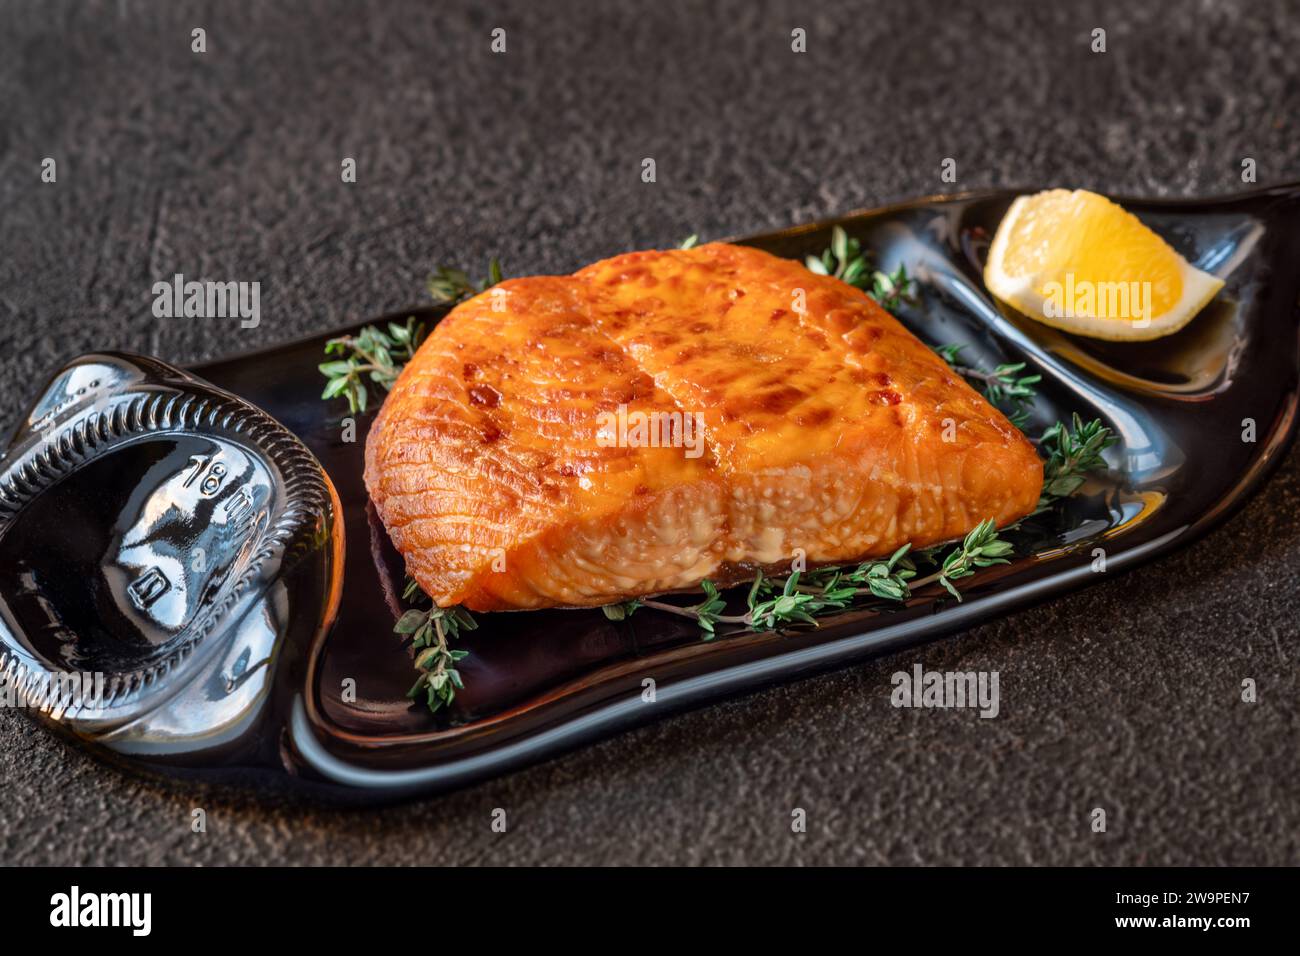 Portion of baked salmon fillet with thyme and lemon Stock Photo